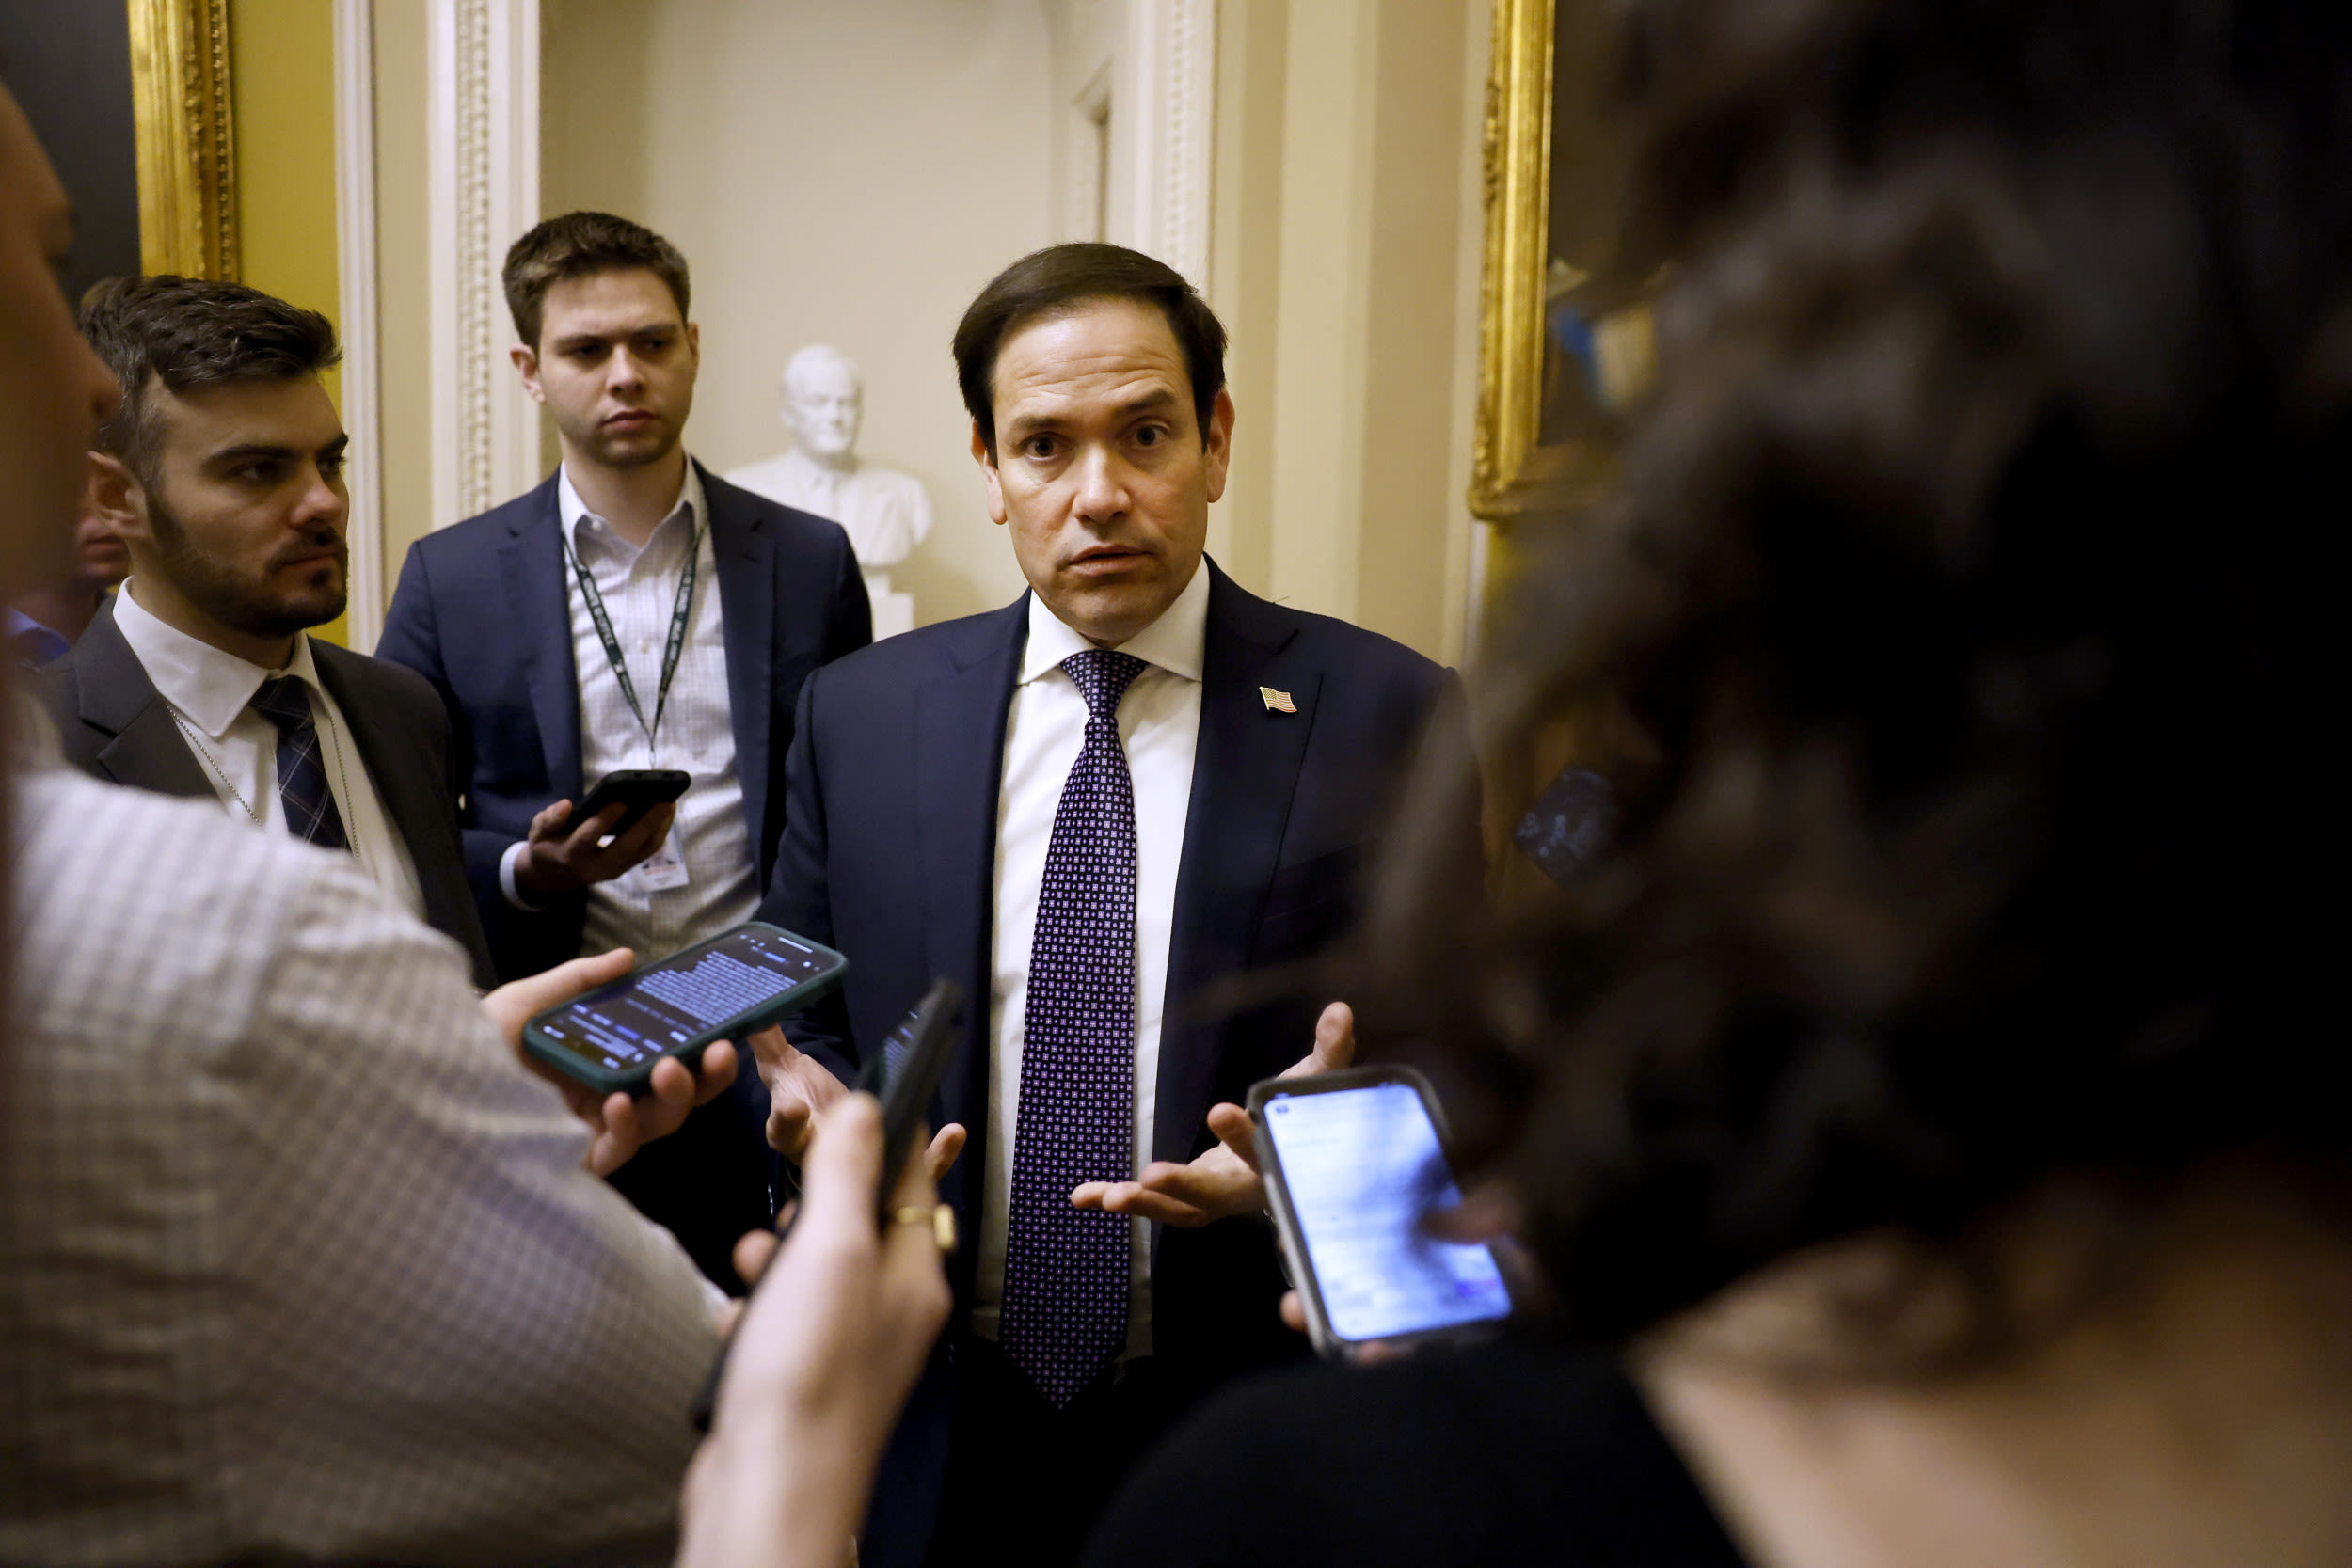 Marco Rubio's response to accepting election results met with alarm